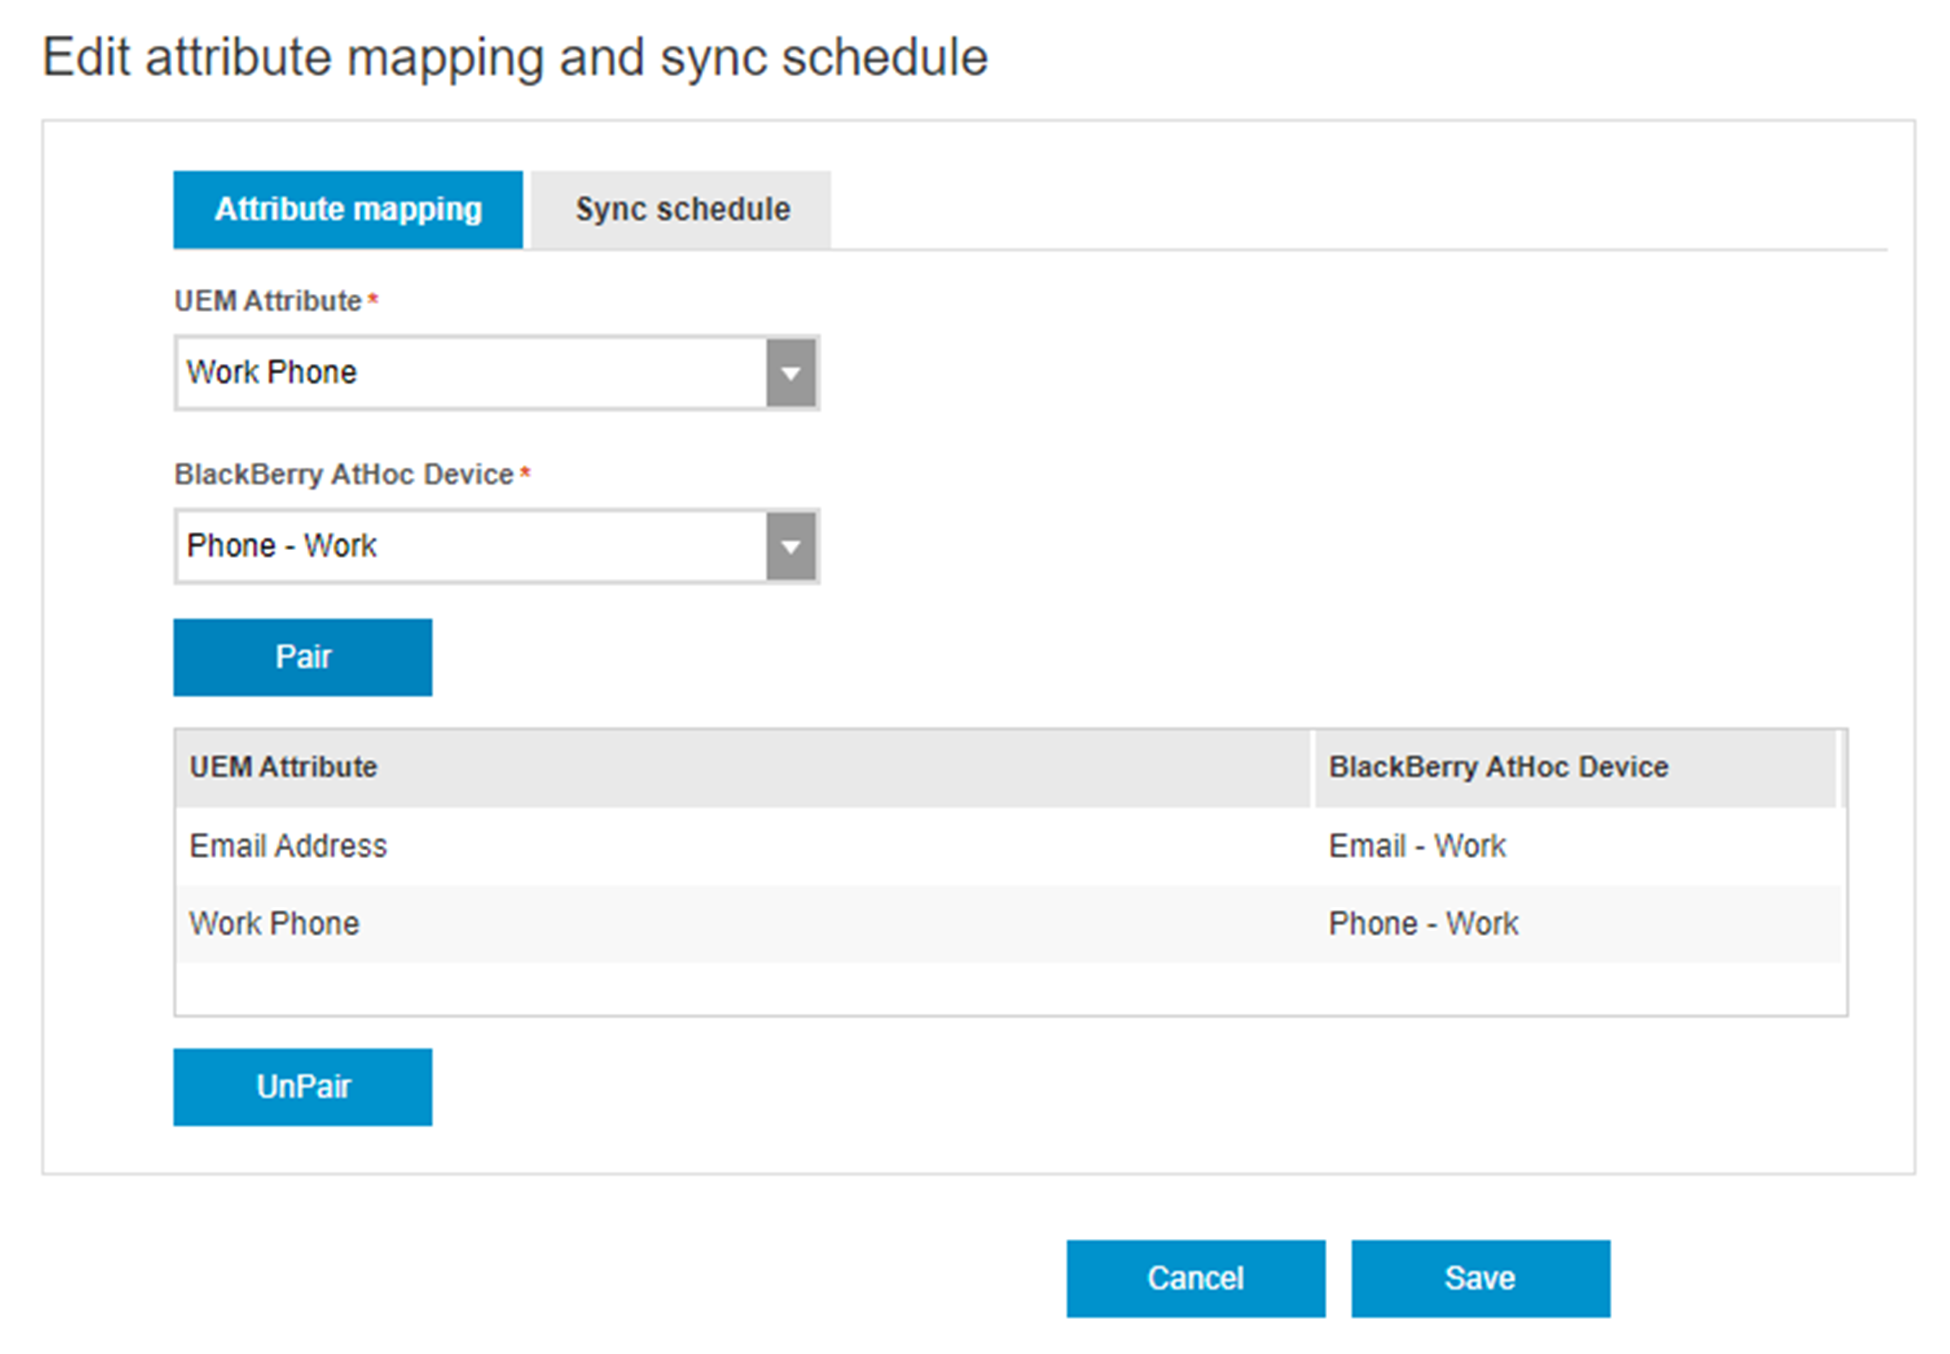 The Edit attribute mapping and sync schedule window in UEM